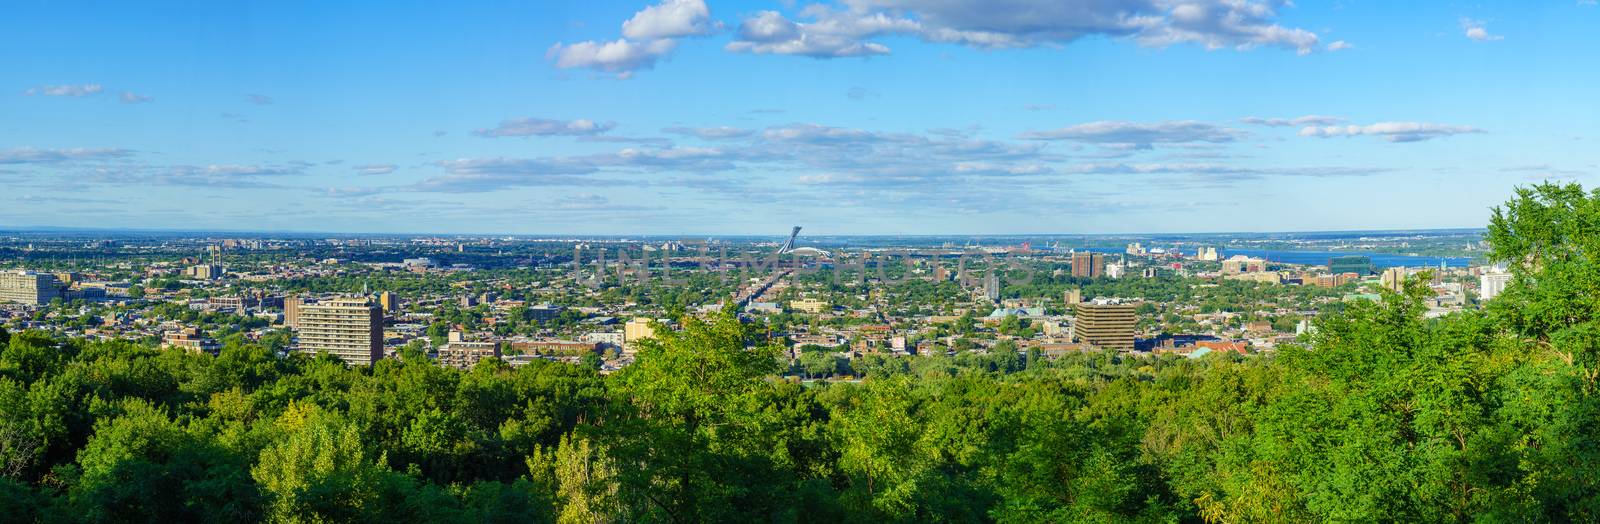 Panoramic view of the eastern part of Montreal by RnDmS